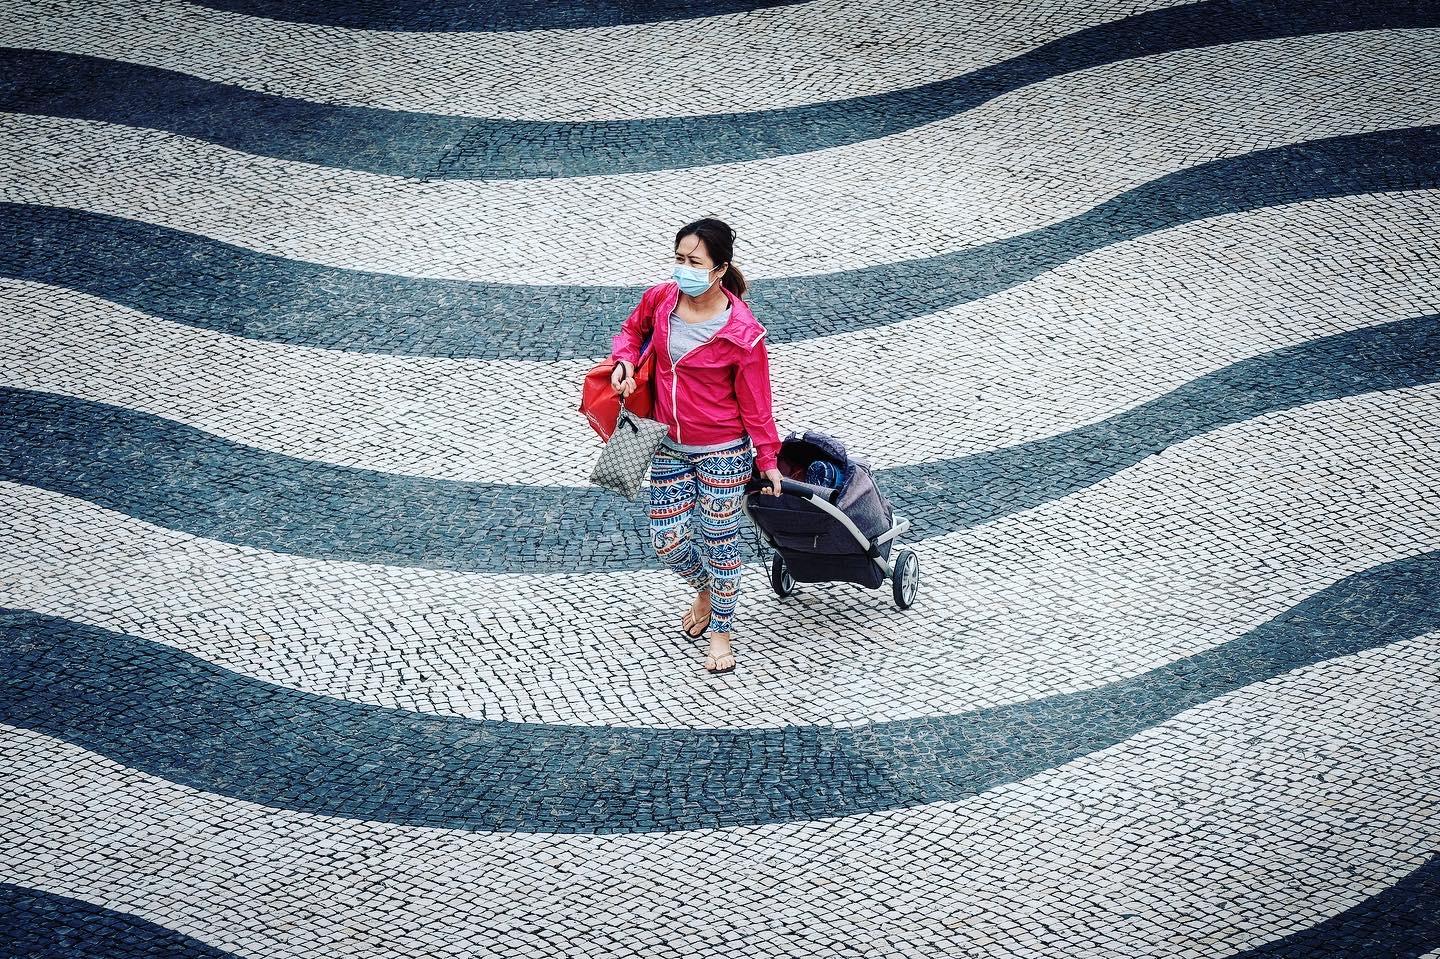 Portuguese pavement in Macau during pandemic times